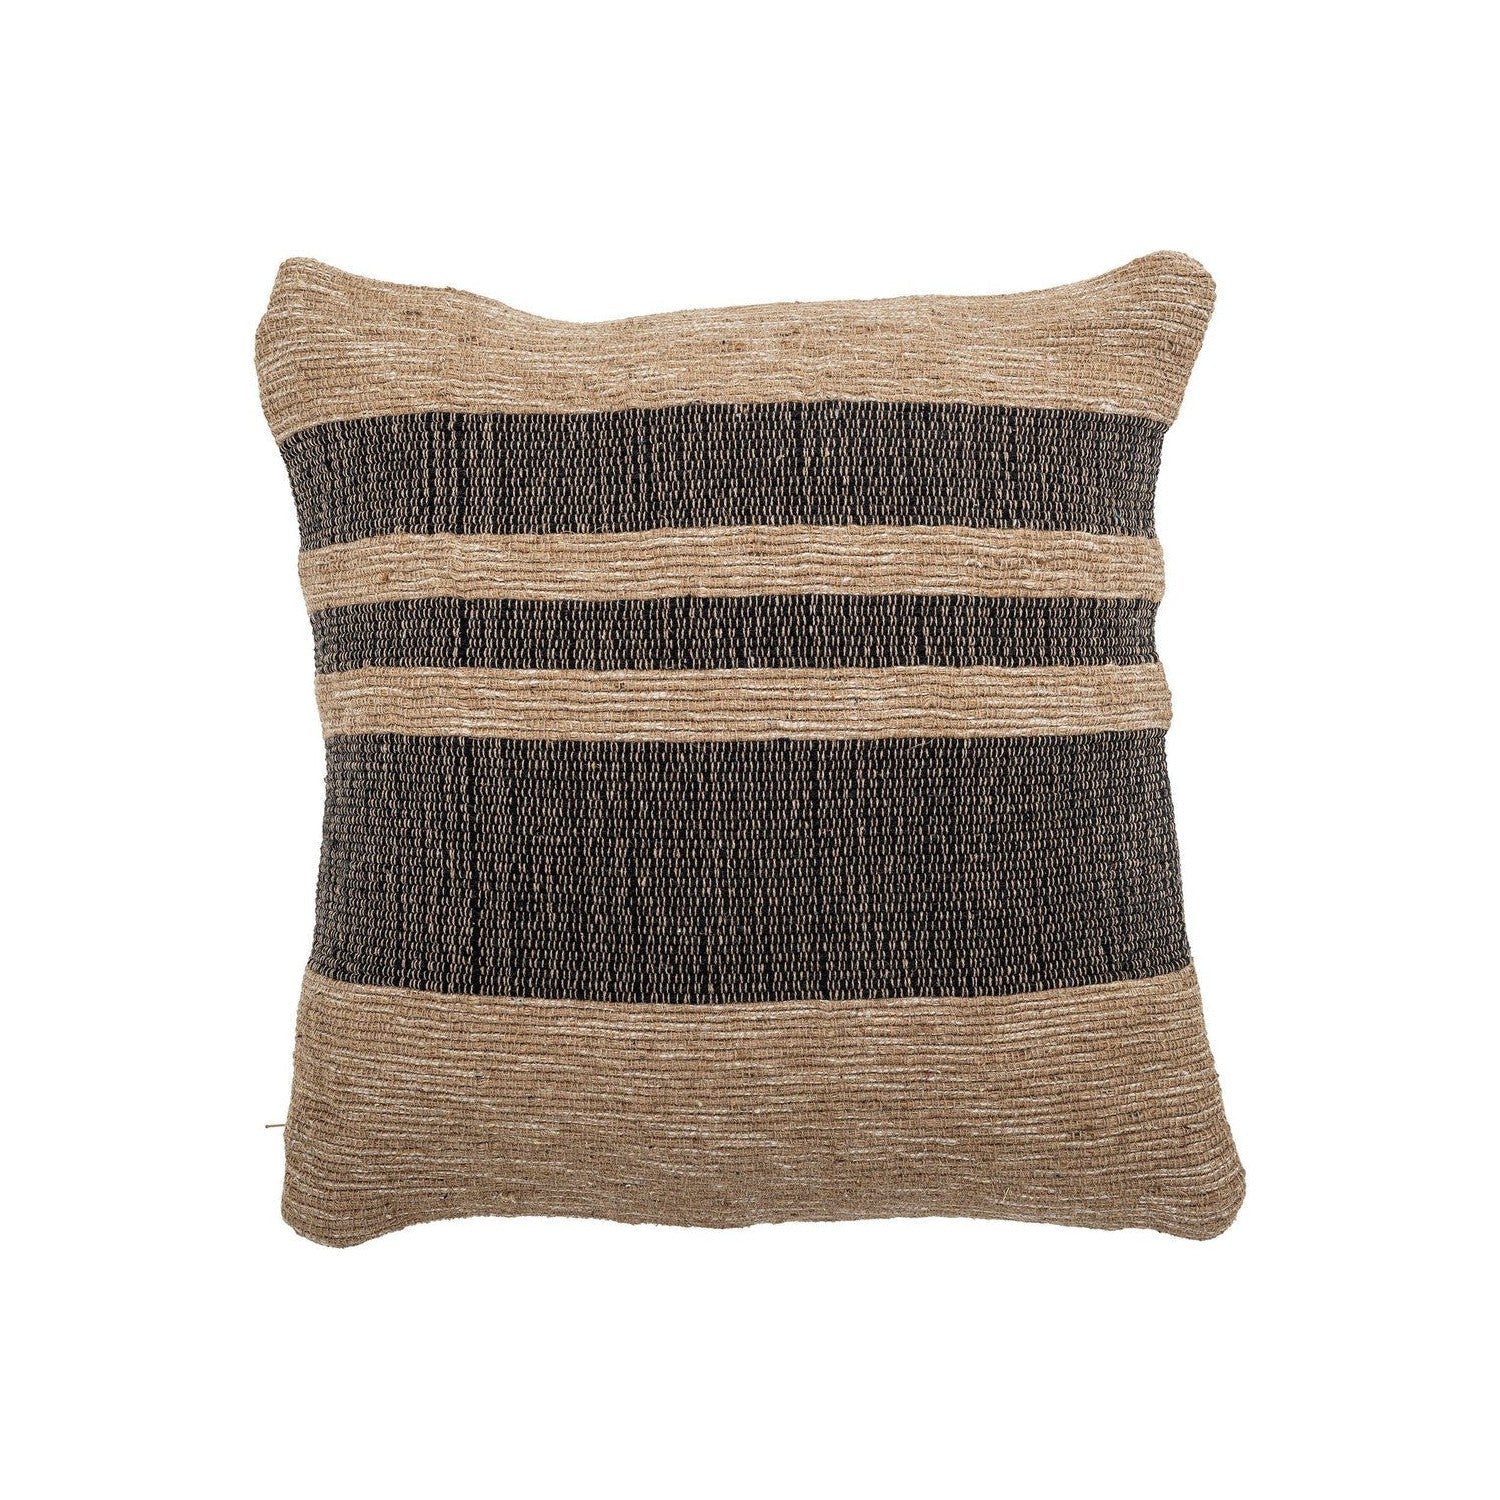 Bloomingville Temi Cushion, Black, Recycled Cotton